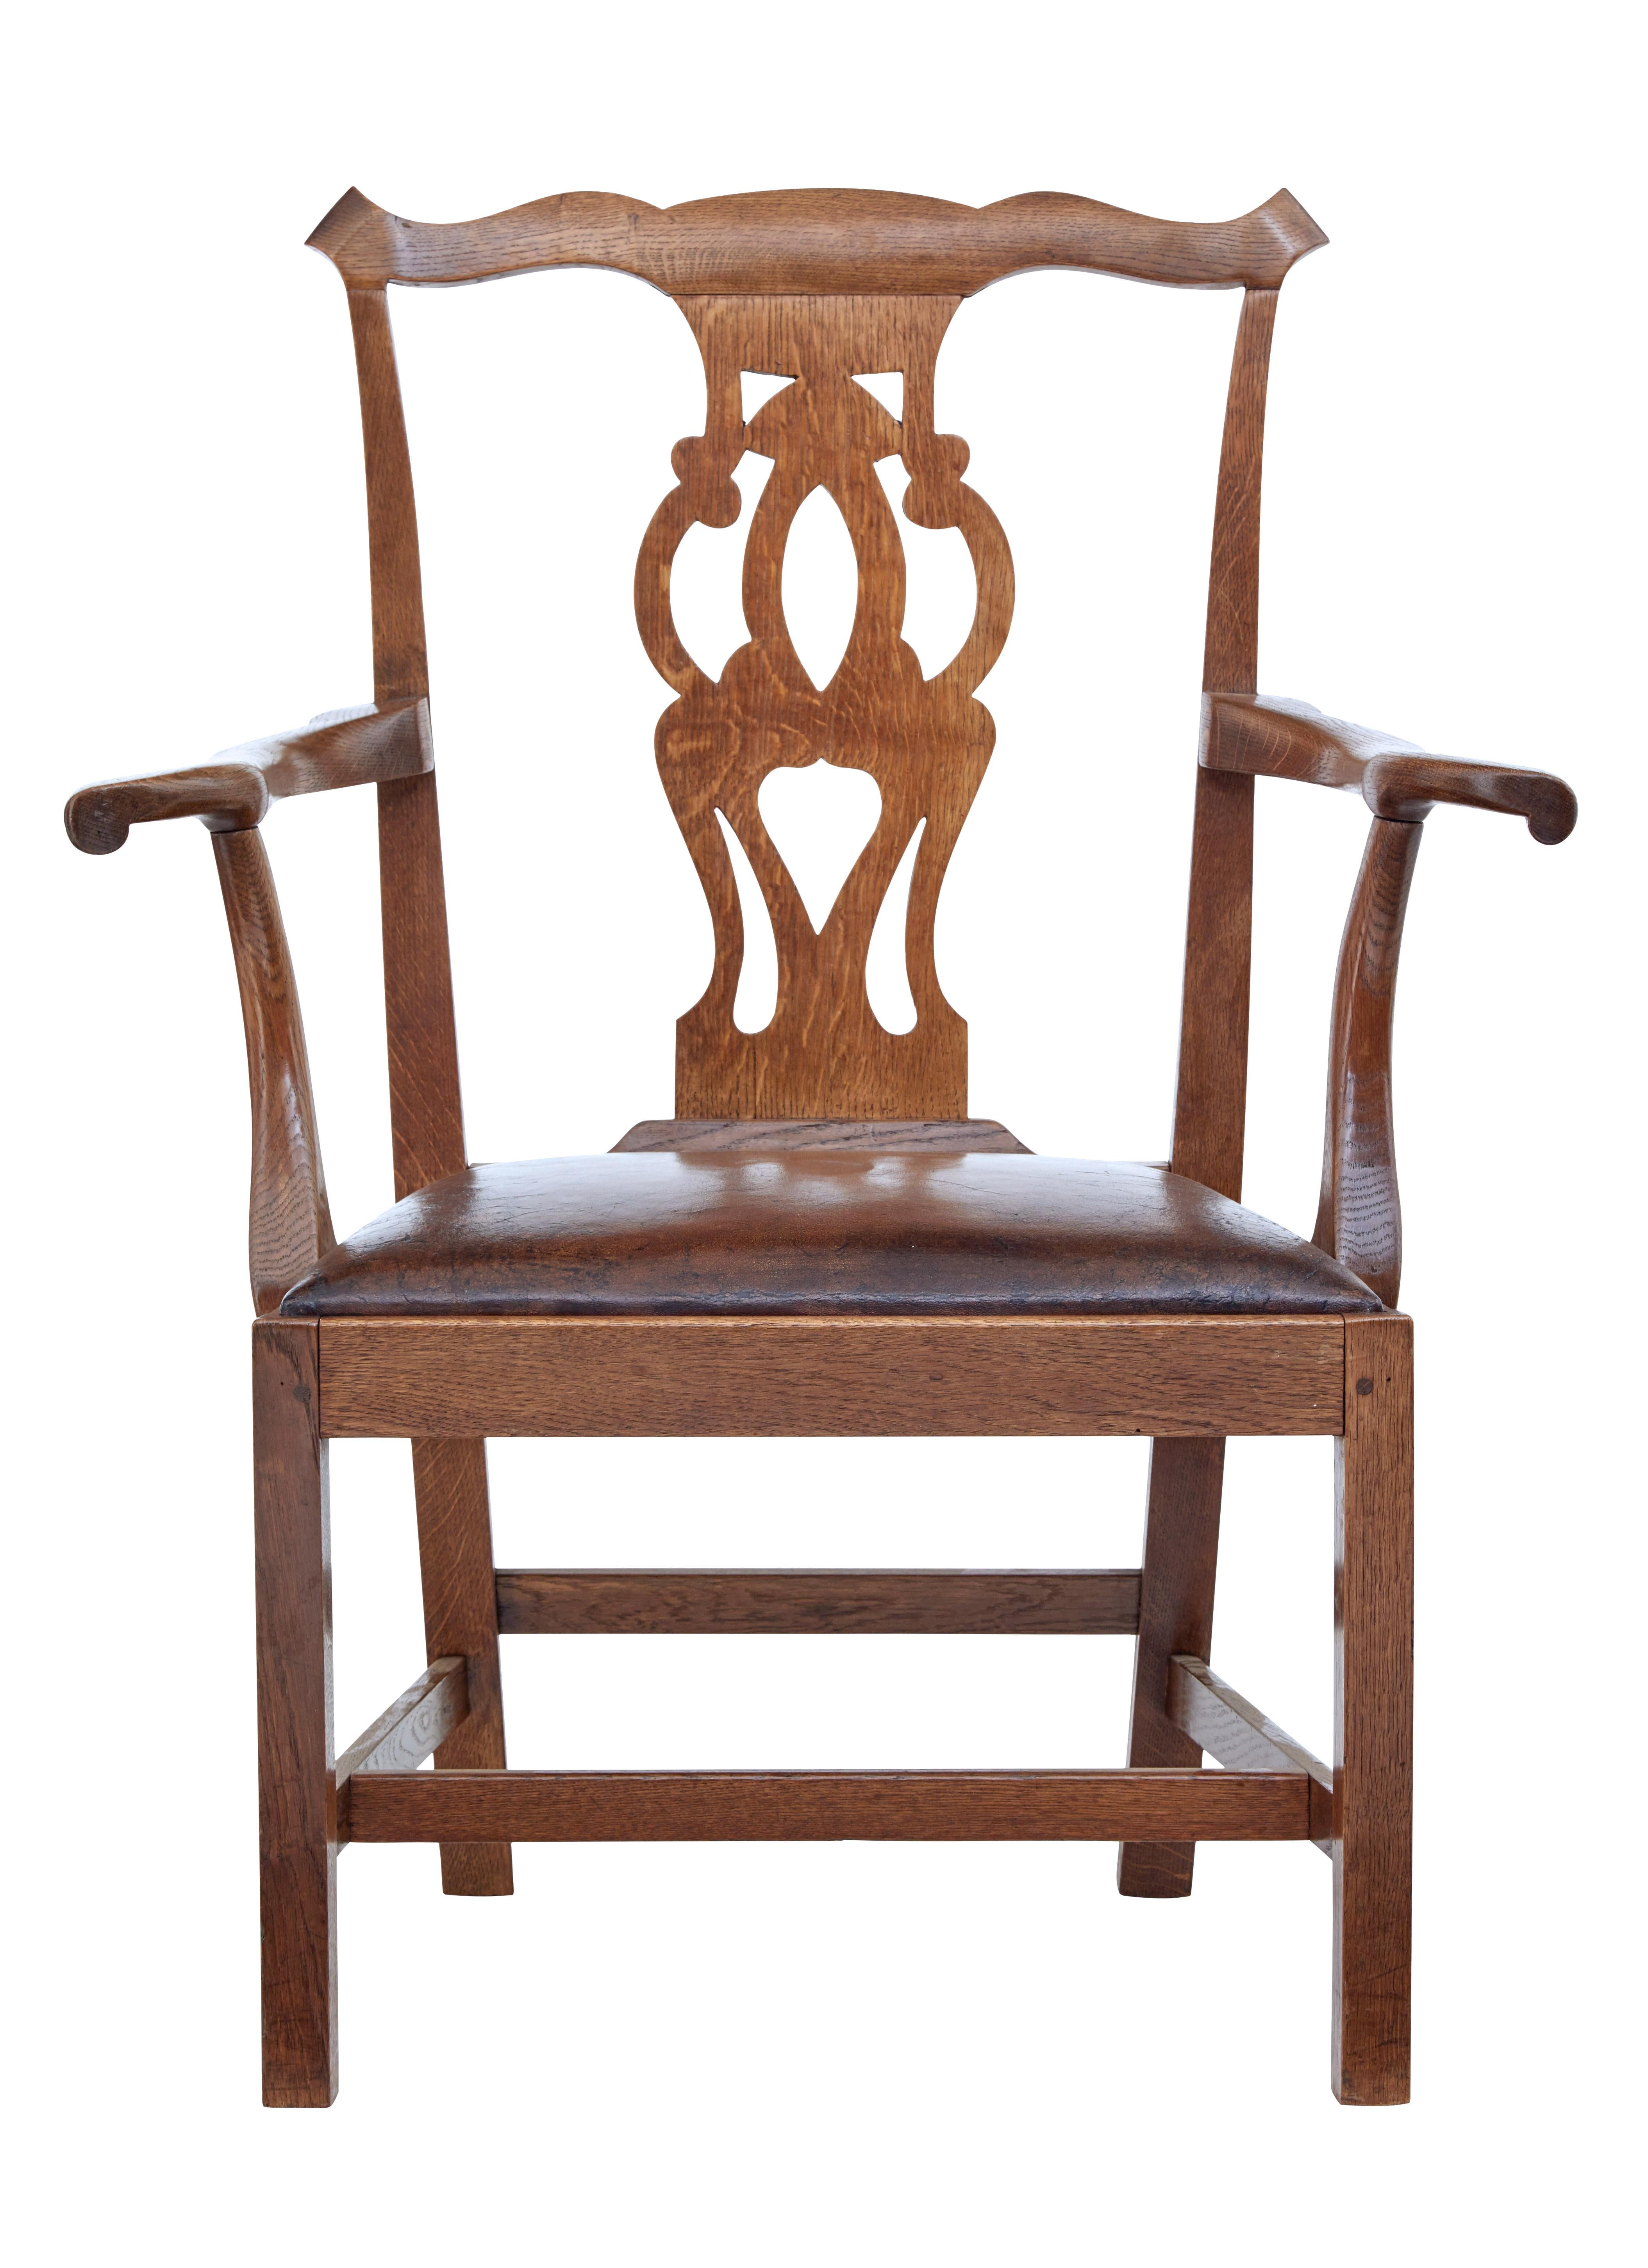 Mid 19th century shepherds crook oak armchair circa 1840, made from solid oak.

Fantastic chair with the proportions that lends itself well to making it a desk chair.

Shaped back with fret work back rest. Real deep shepherds crook shaped arms,